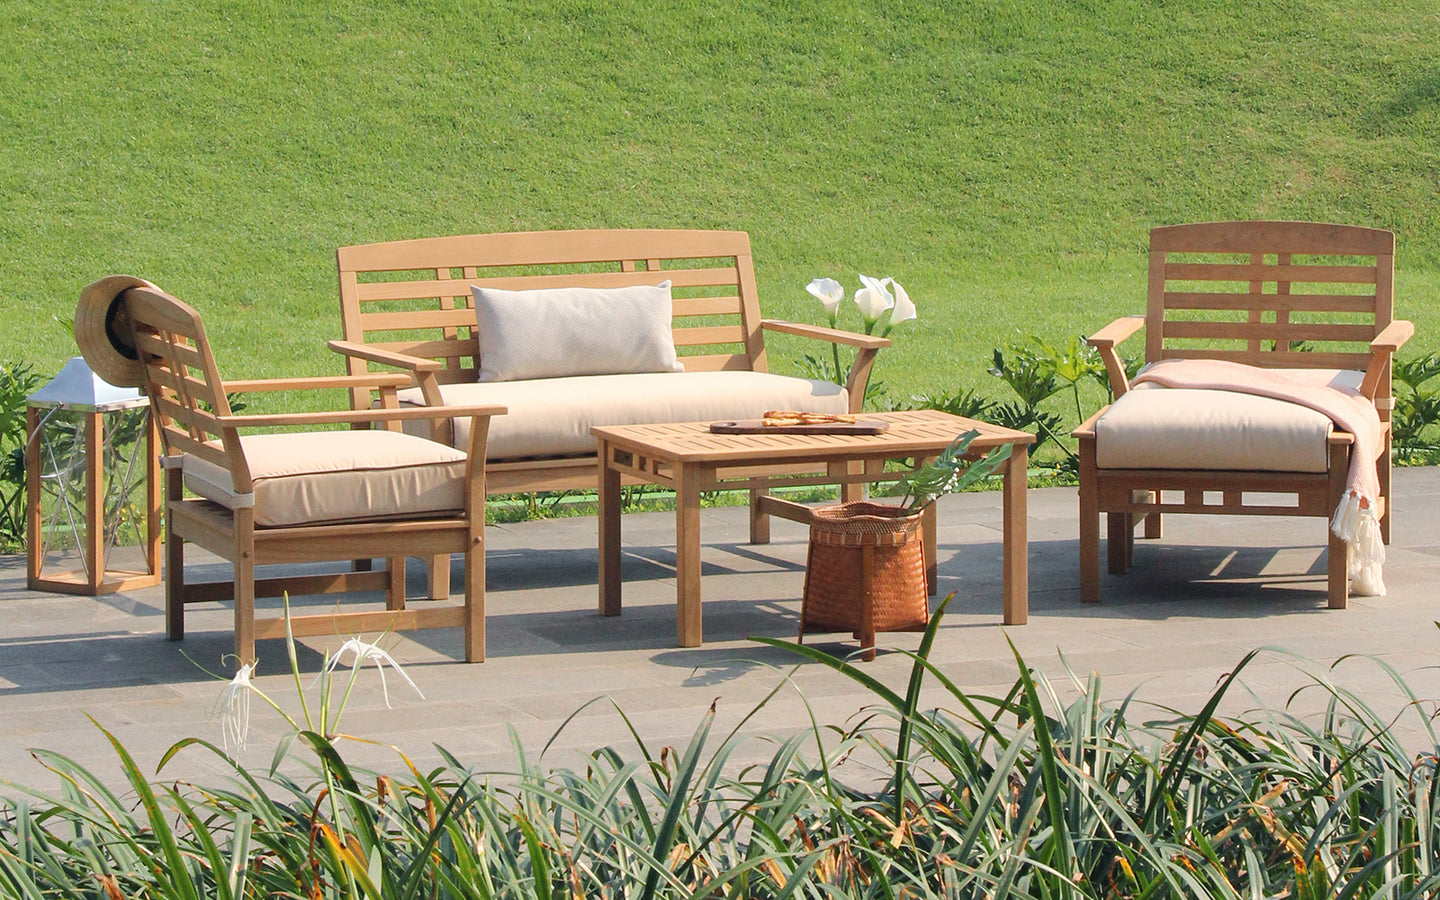 An Insider’s Guide To Choosing The Right Furniture For Your Backyard